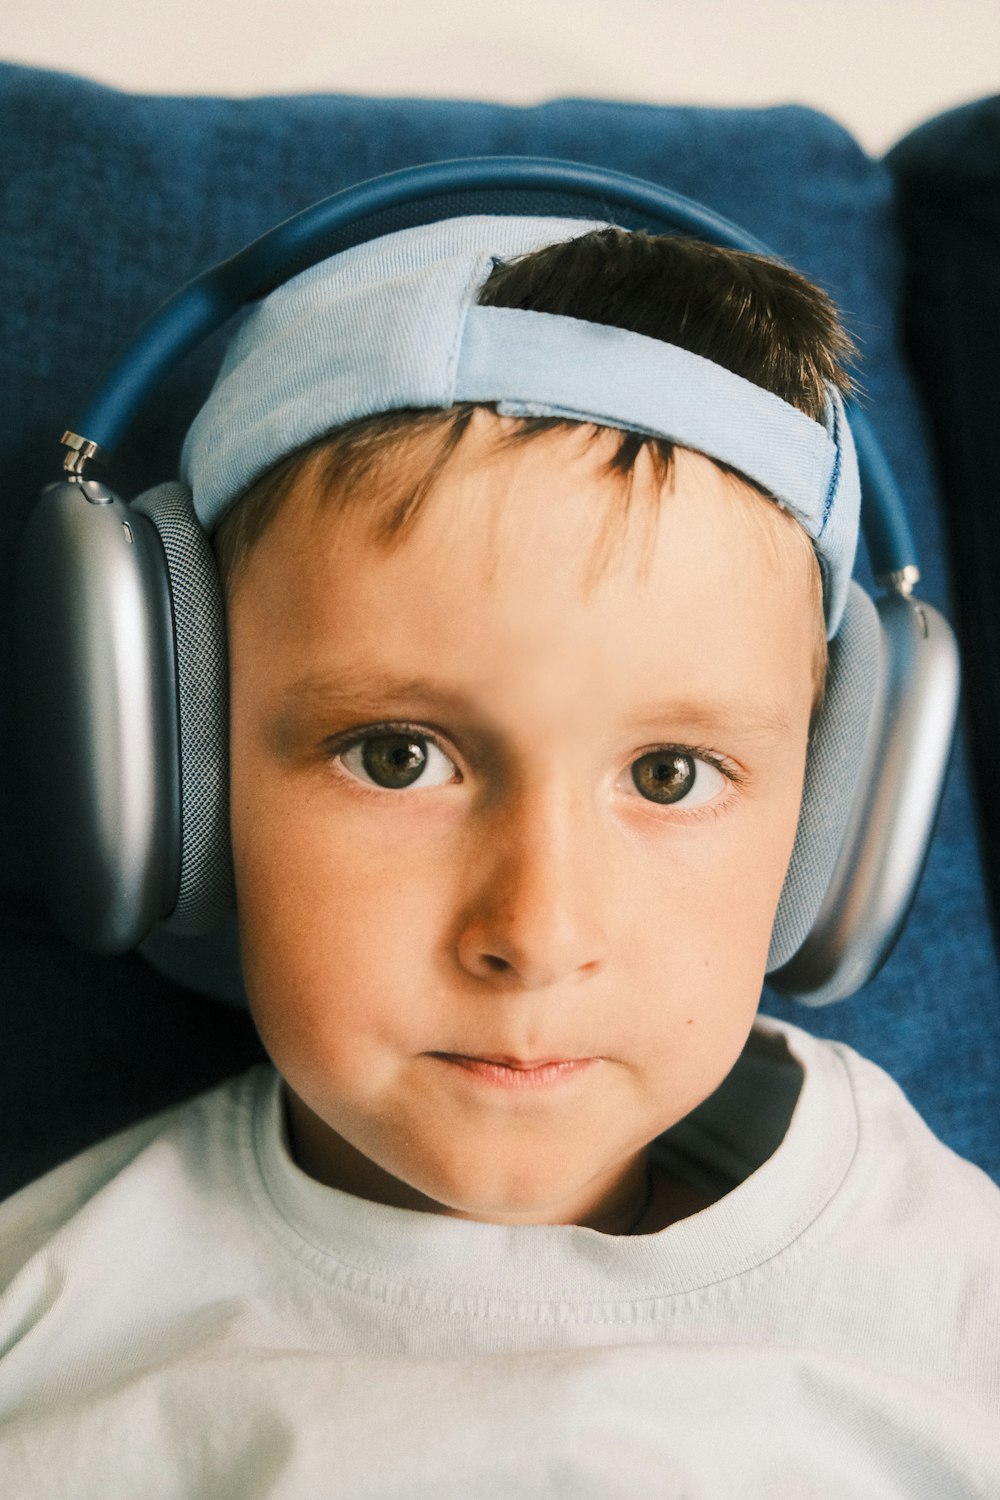 a young boy wearing headphones on top of his head